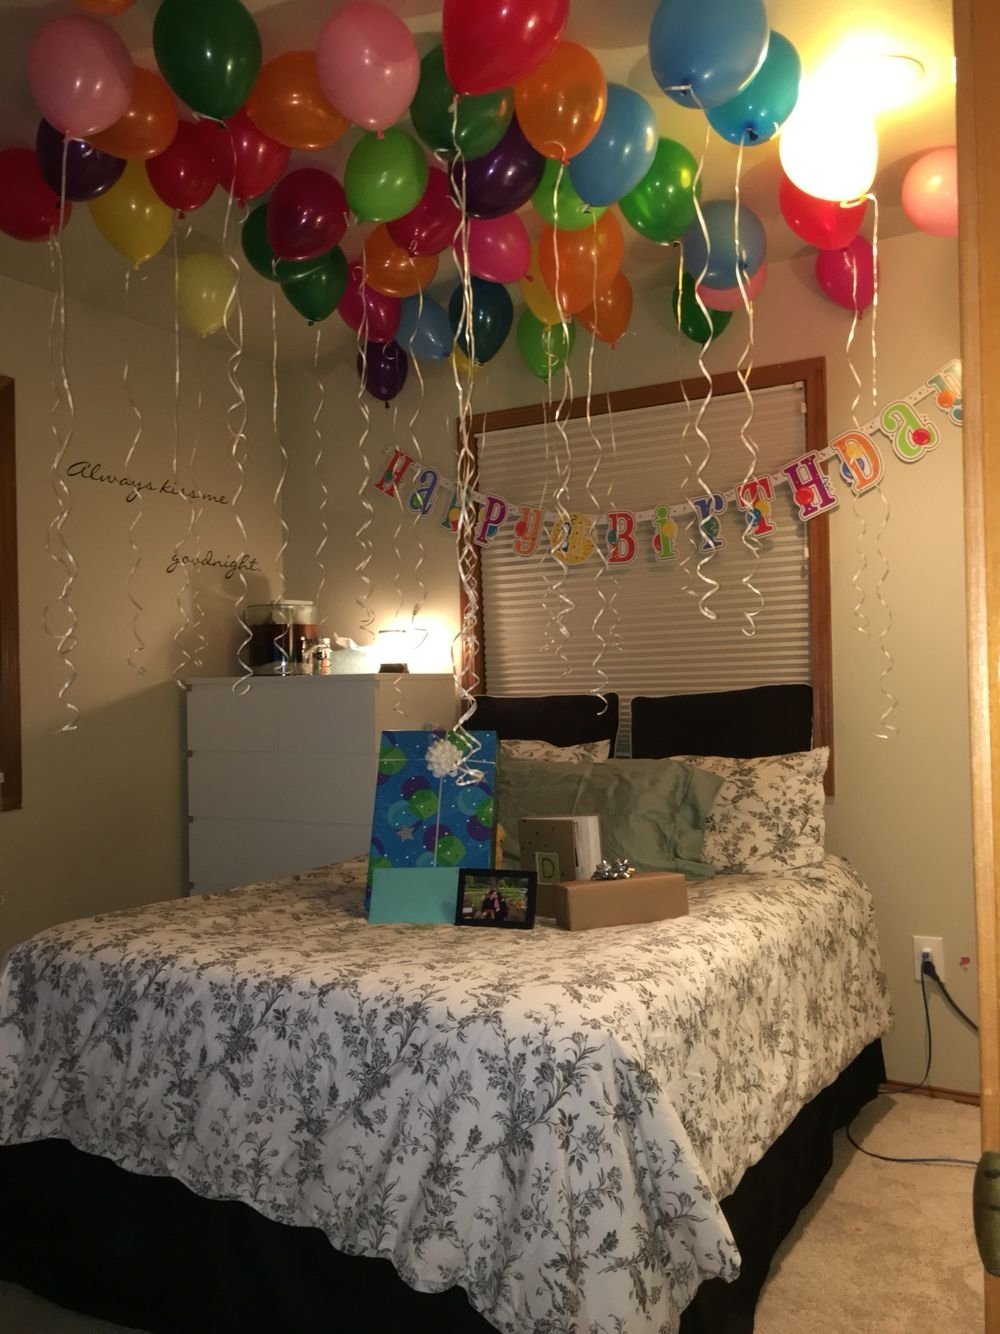 10 Fabulous Romantic Birthday Ideas For Her birthday surprise for boyfriend since im not 21 yet we couldnt go 9 2023